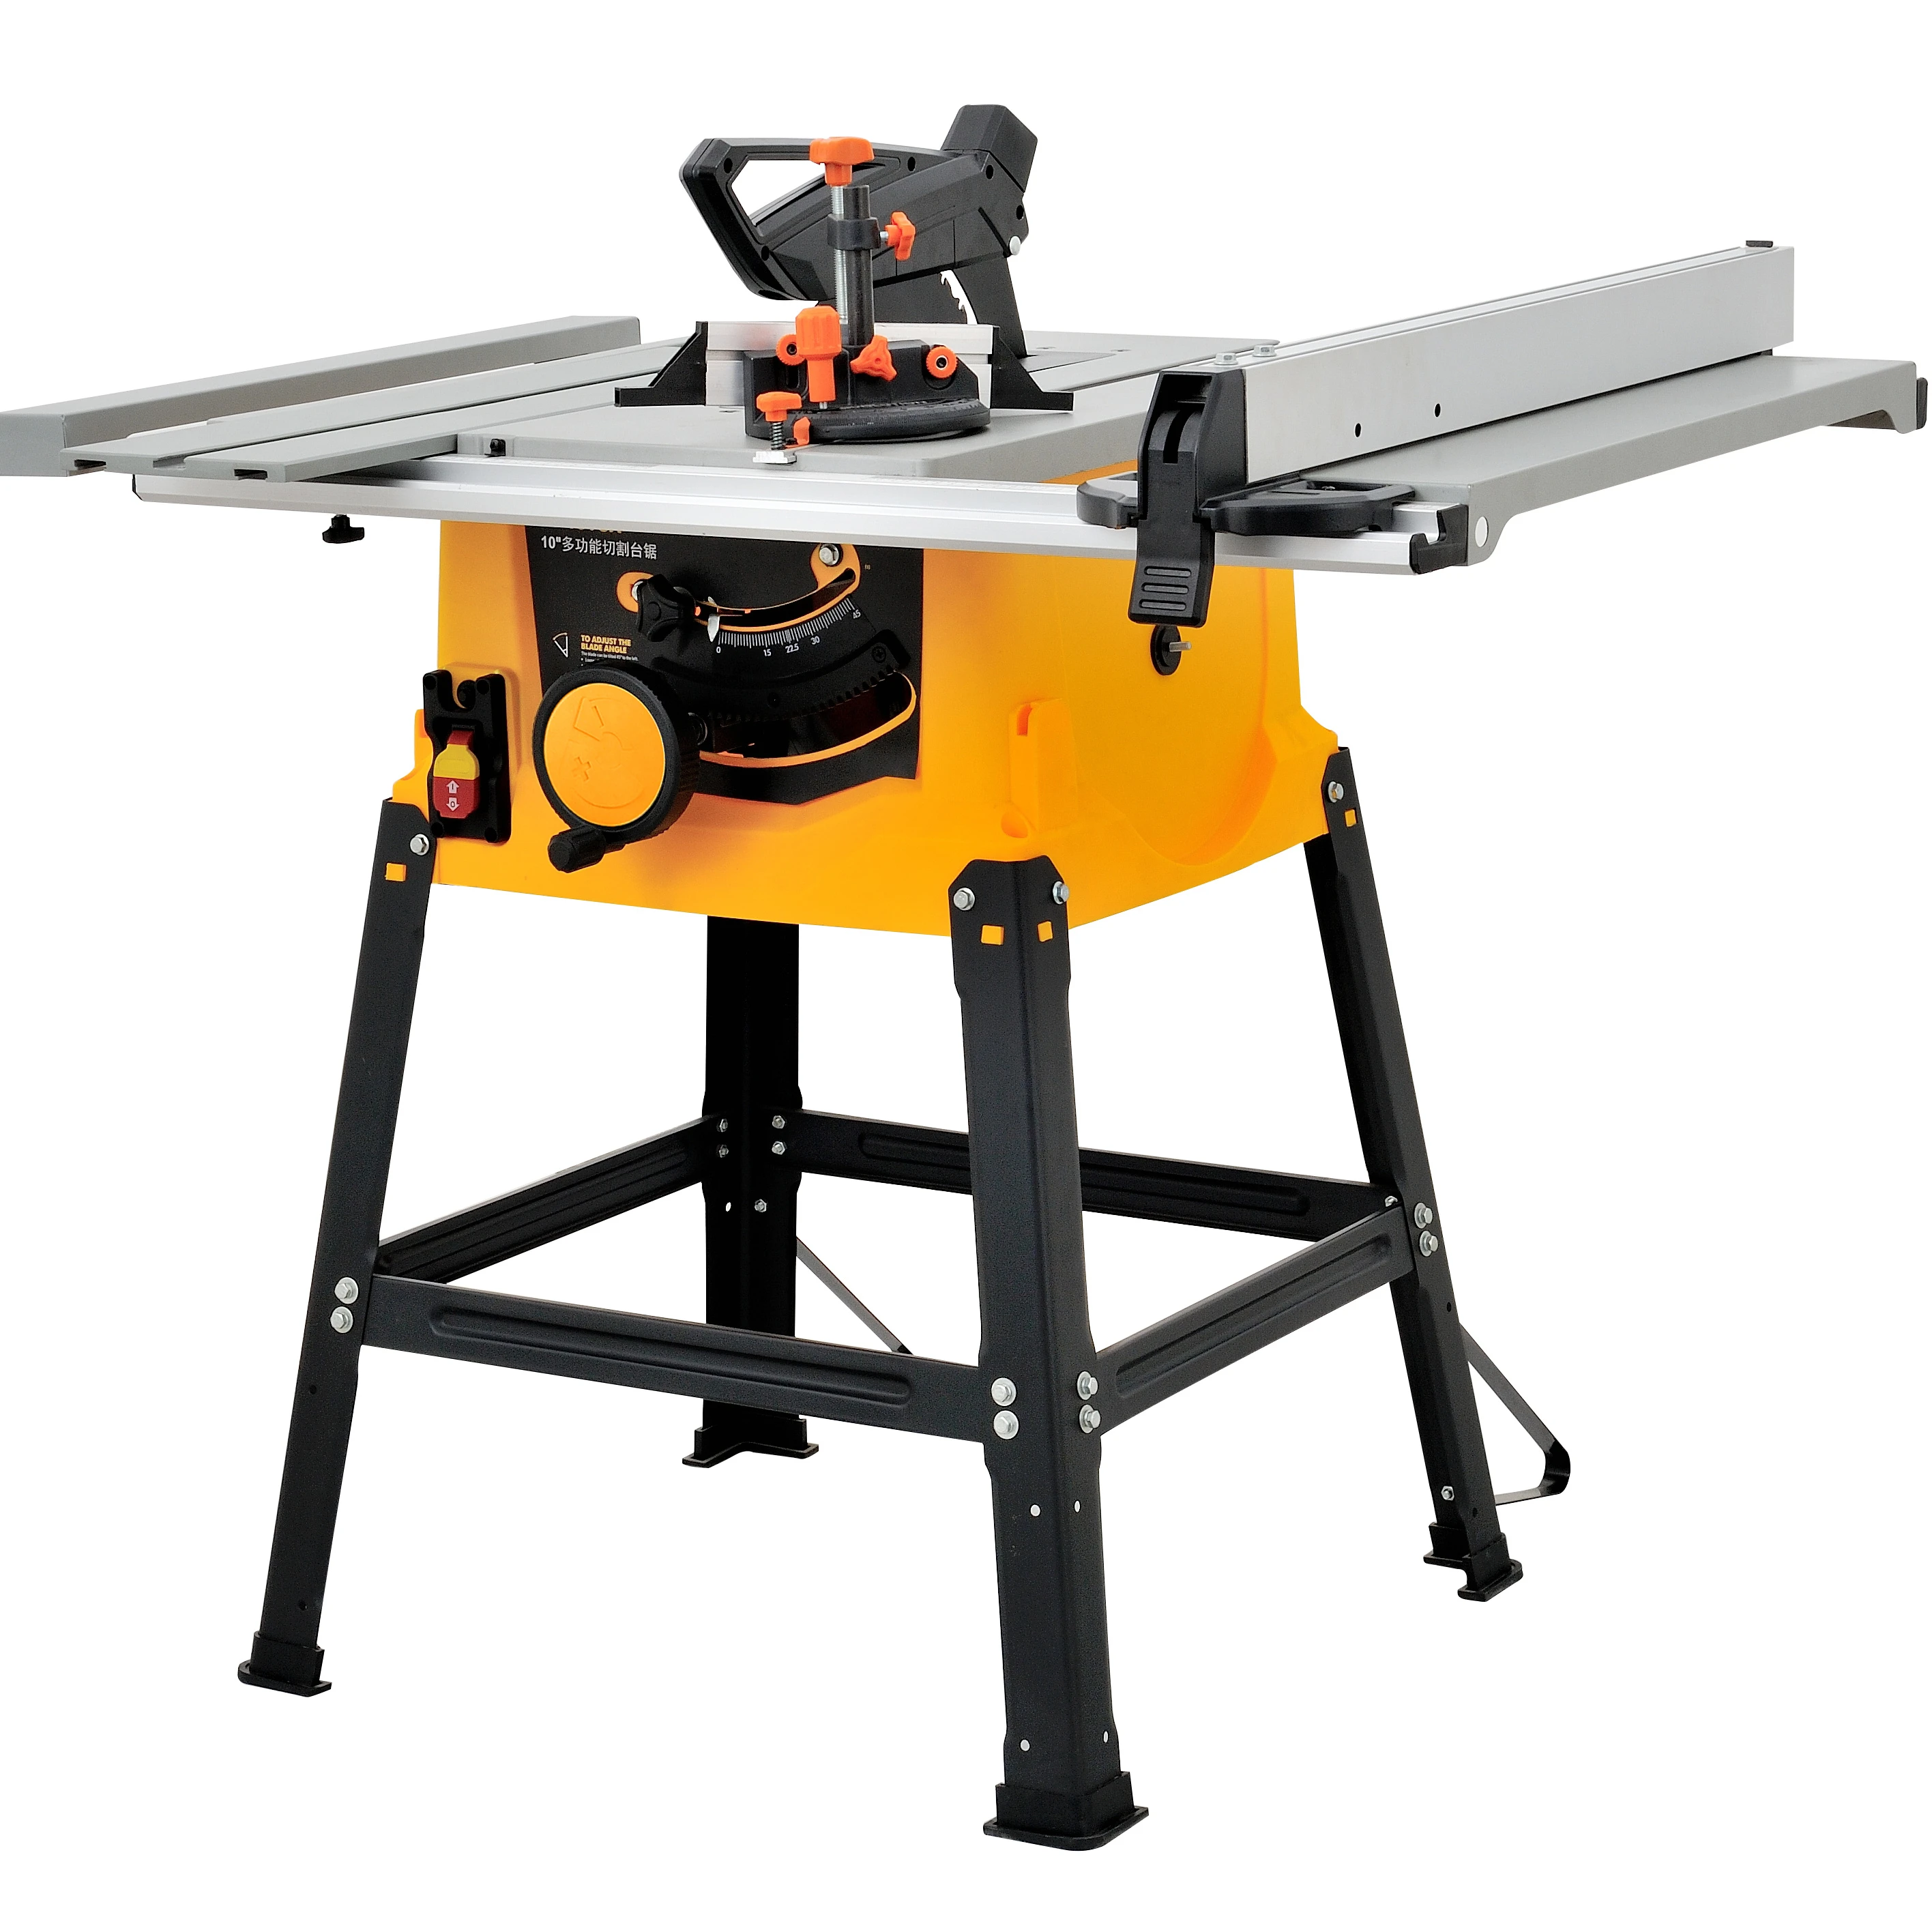 Luxter 255mm 1800w Cutting Table Saw For Wood Working Other Power Saws Buy Table Saw Sale